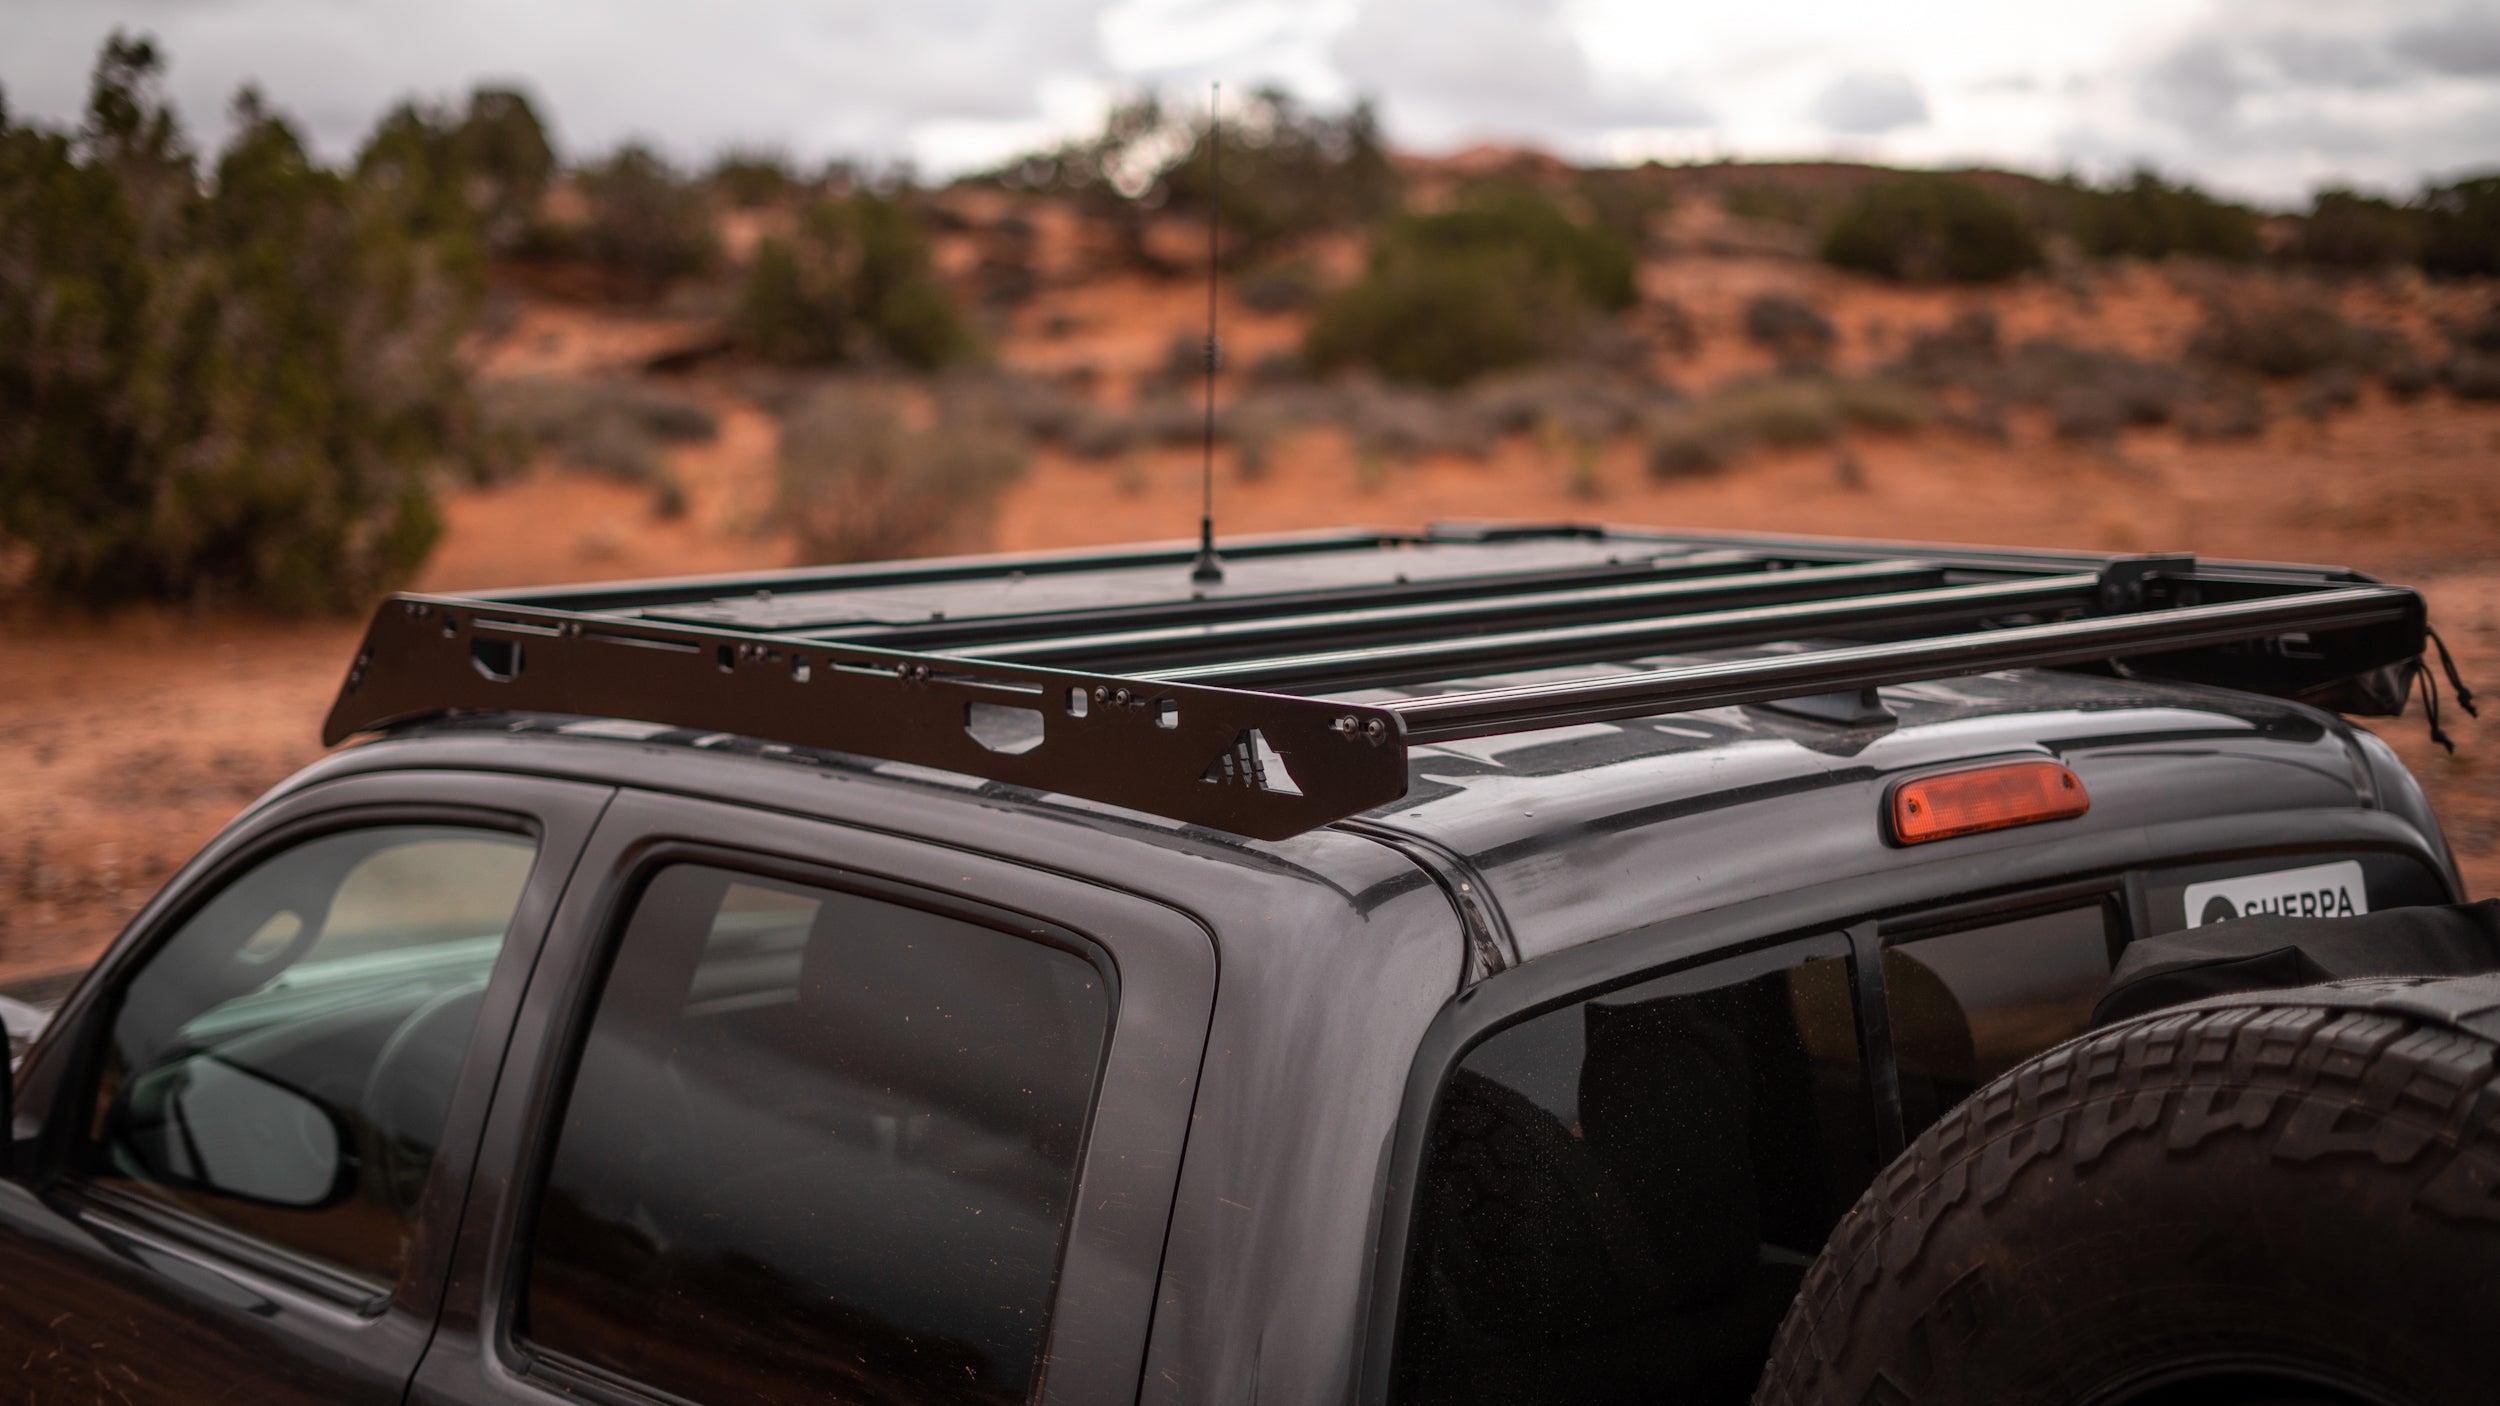 2nd/3rd Gen Toyota Tacoma Roof Rack Rear corner close up of rack on vehicle outside